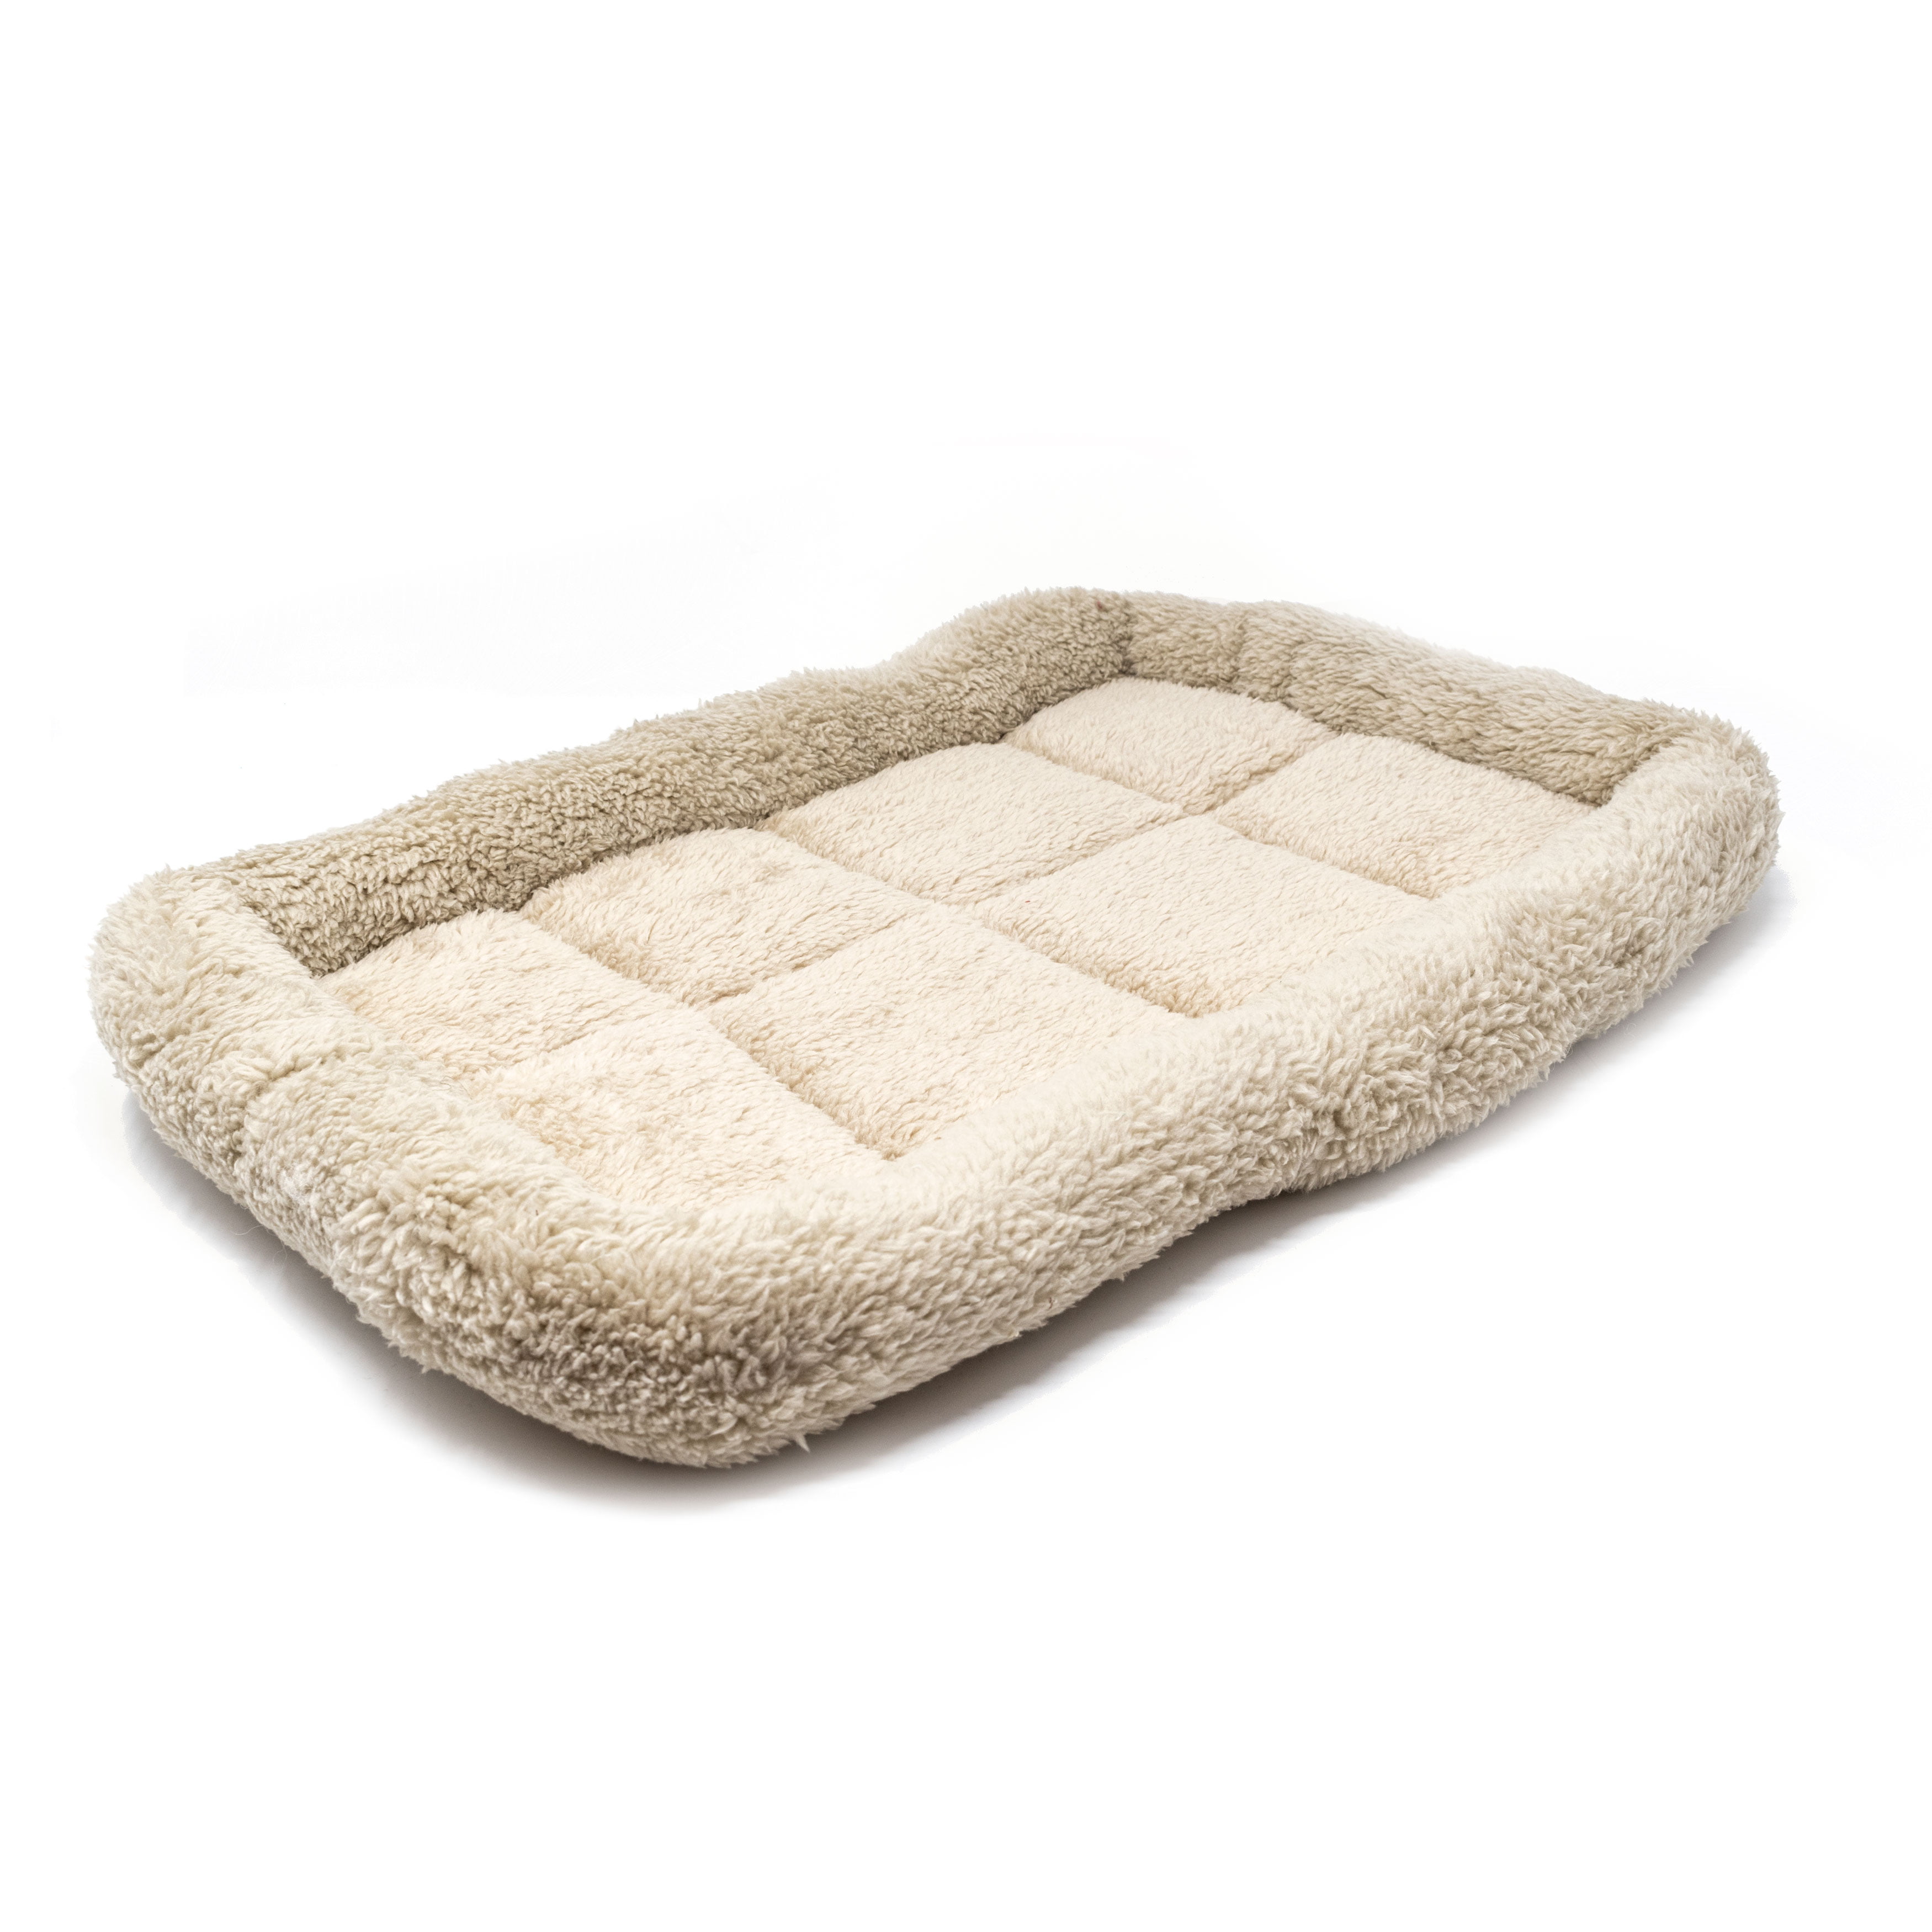 Rectangle Cat Cushion Bed with Blanket Plush Toy as Gift for Small Medium Large Pets Machine Washable Couch Pet Bed Warming Puppy Sleeping Bag with Non-Slip Bottom Cat Bed HXN Dog Bed 